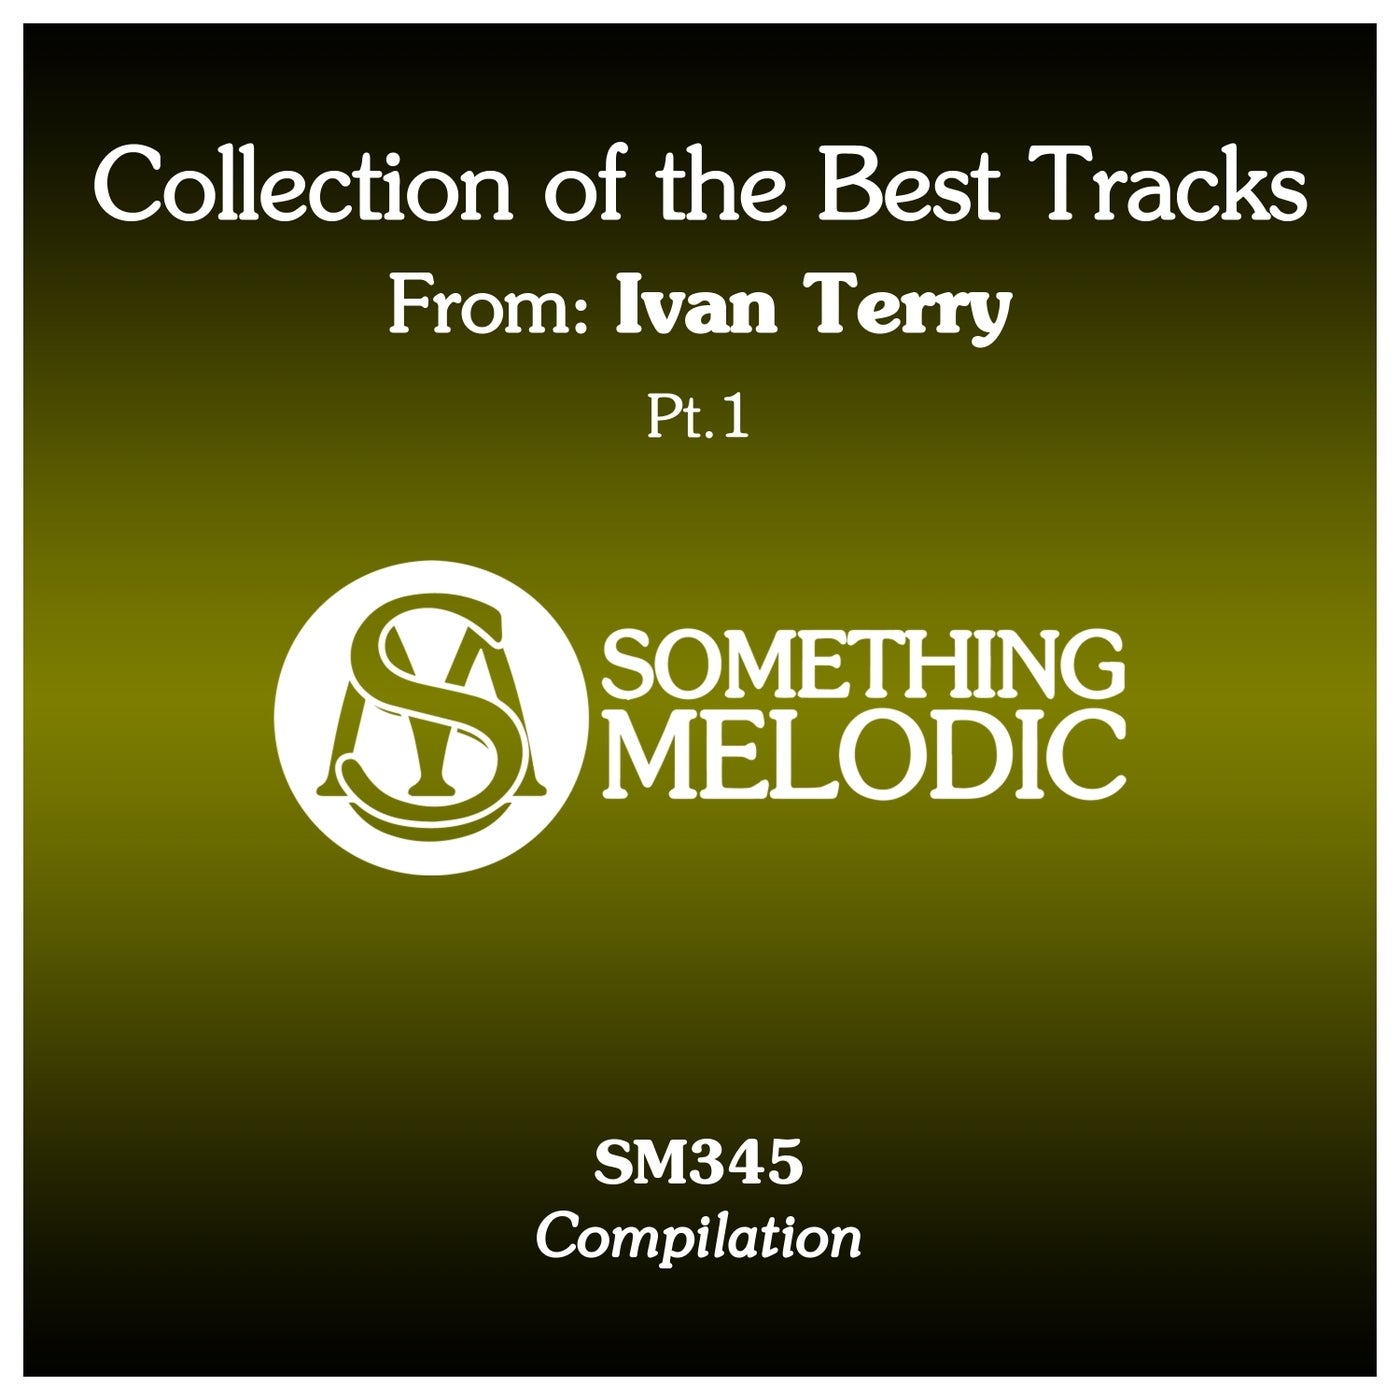 Collection of the Best Tracks From: Ivan Terry, Pt. 1